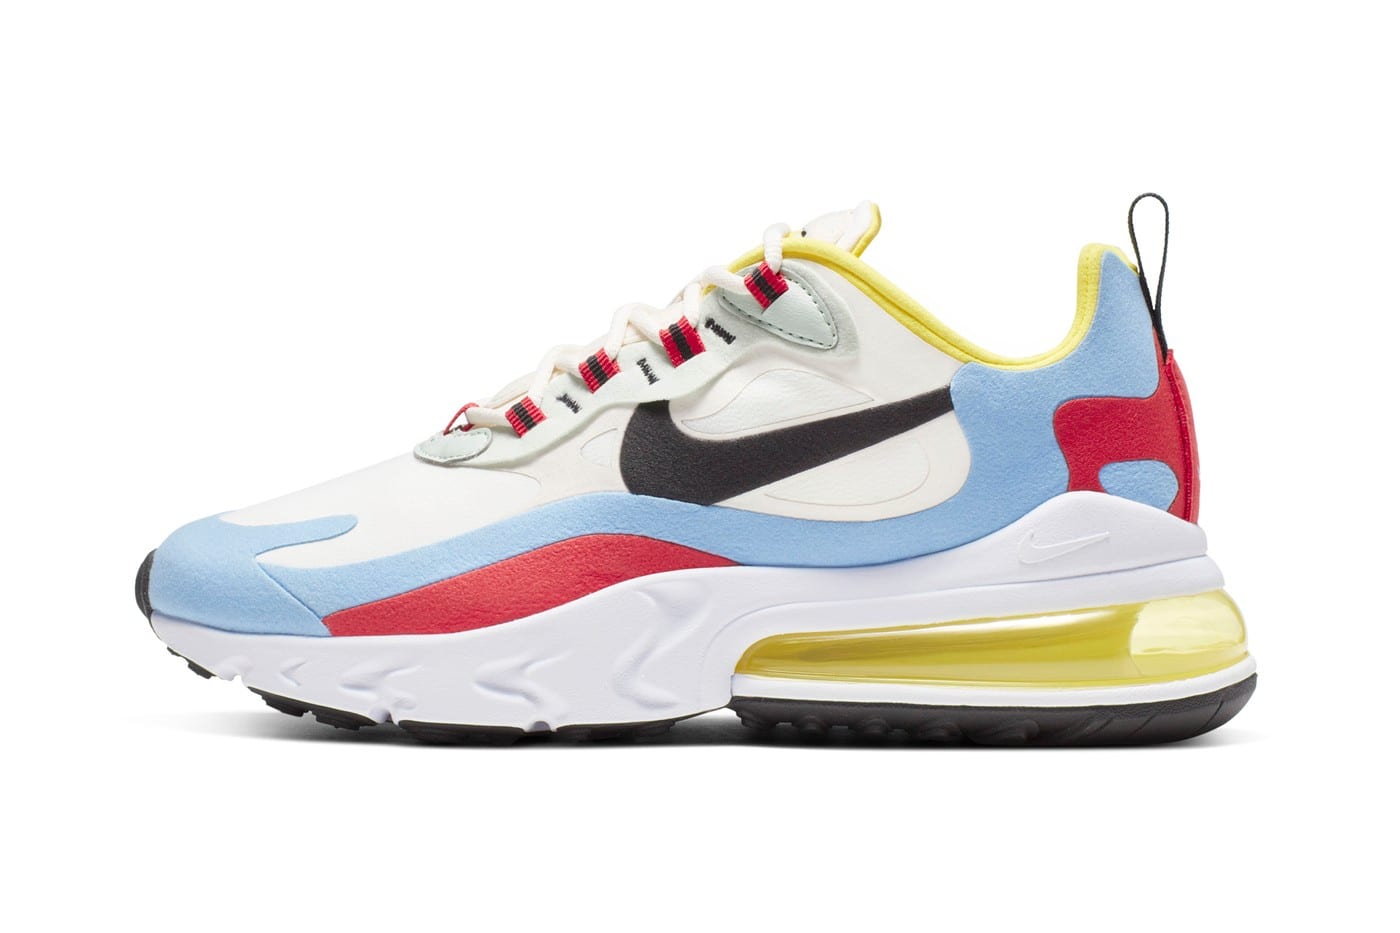 Introducing the Nike Air Max 270 React | The Source